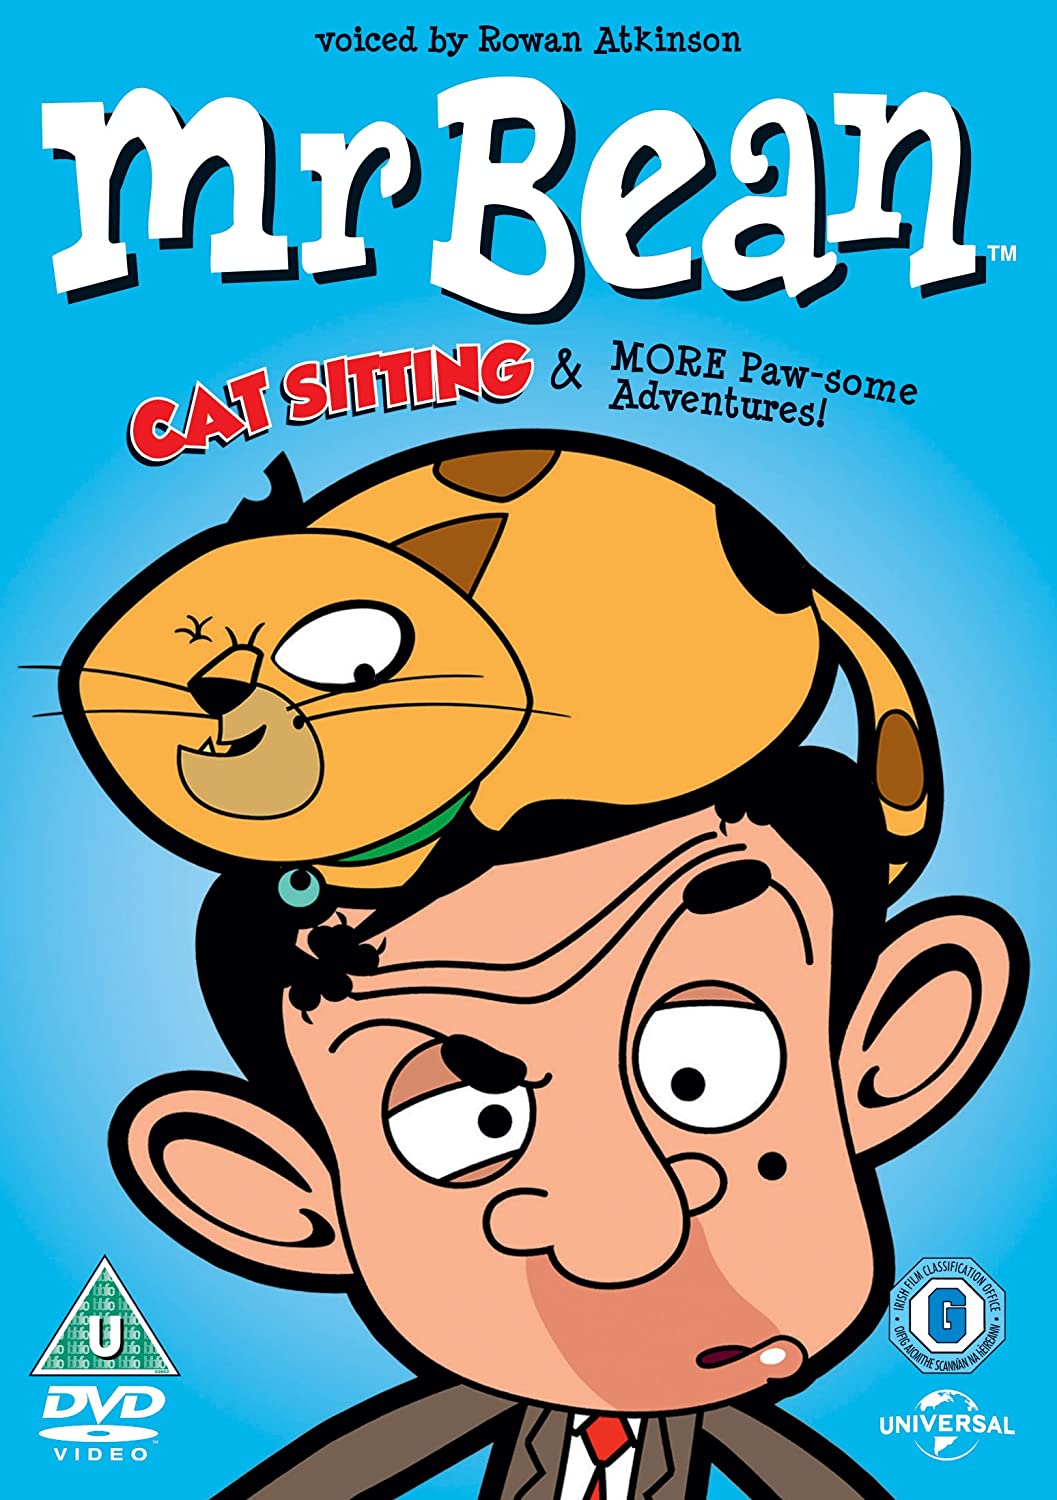 Mr Bean - The Animated Series: Cat Sitting - Animation/Comedy [DVD]